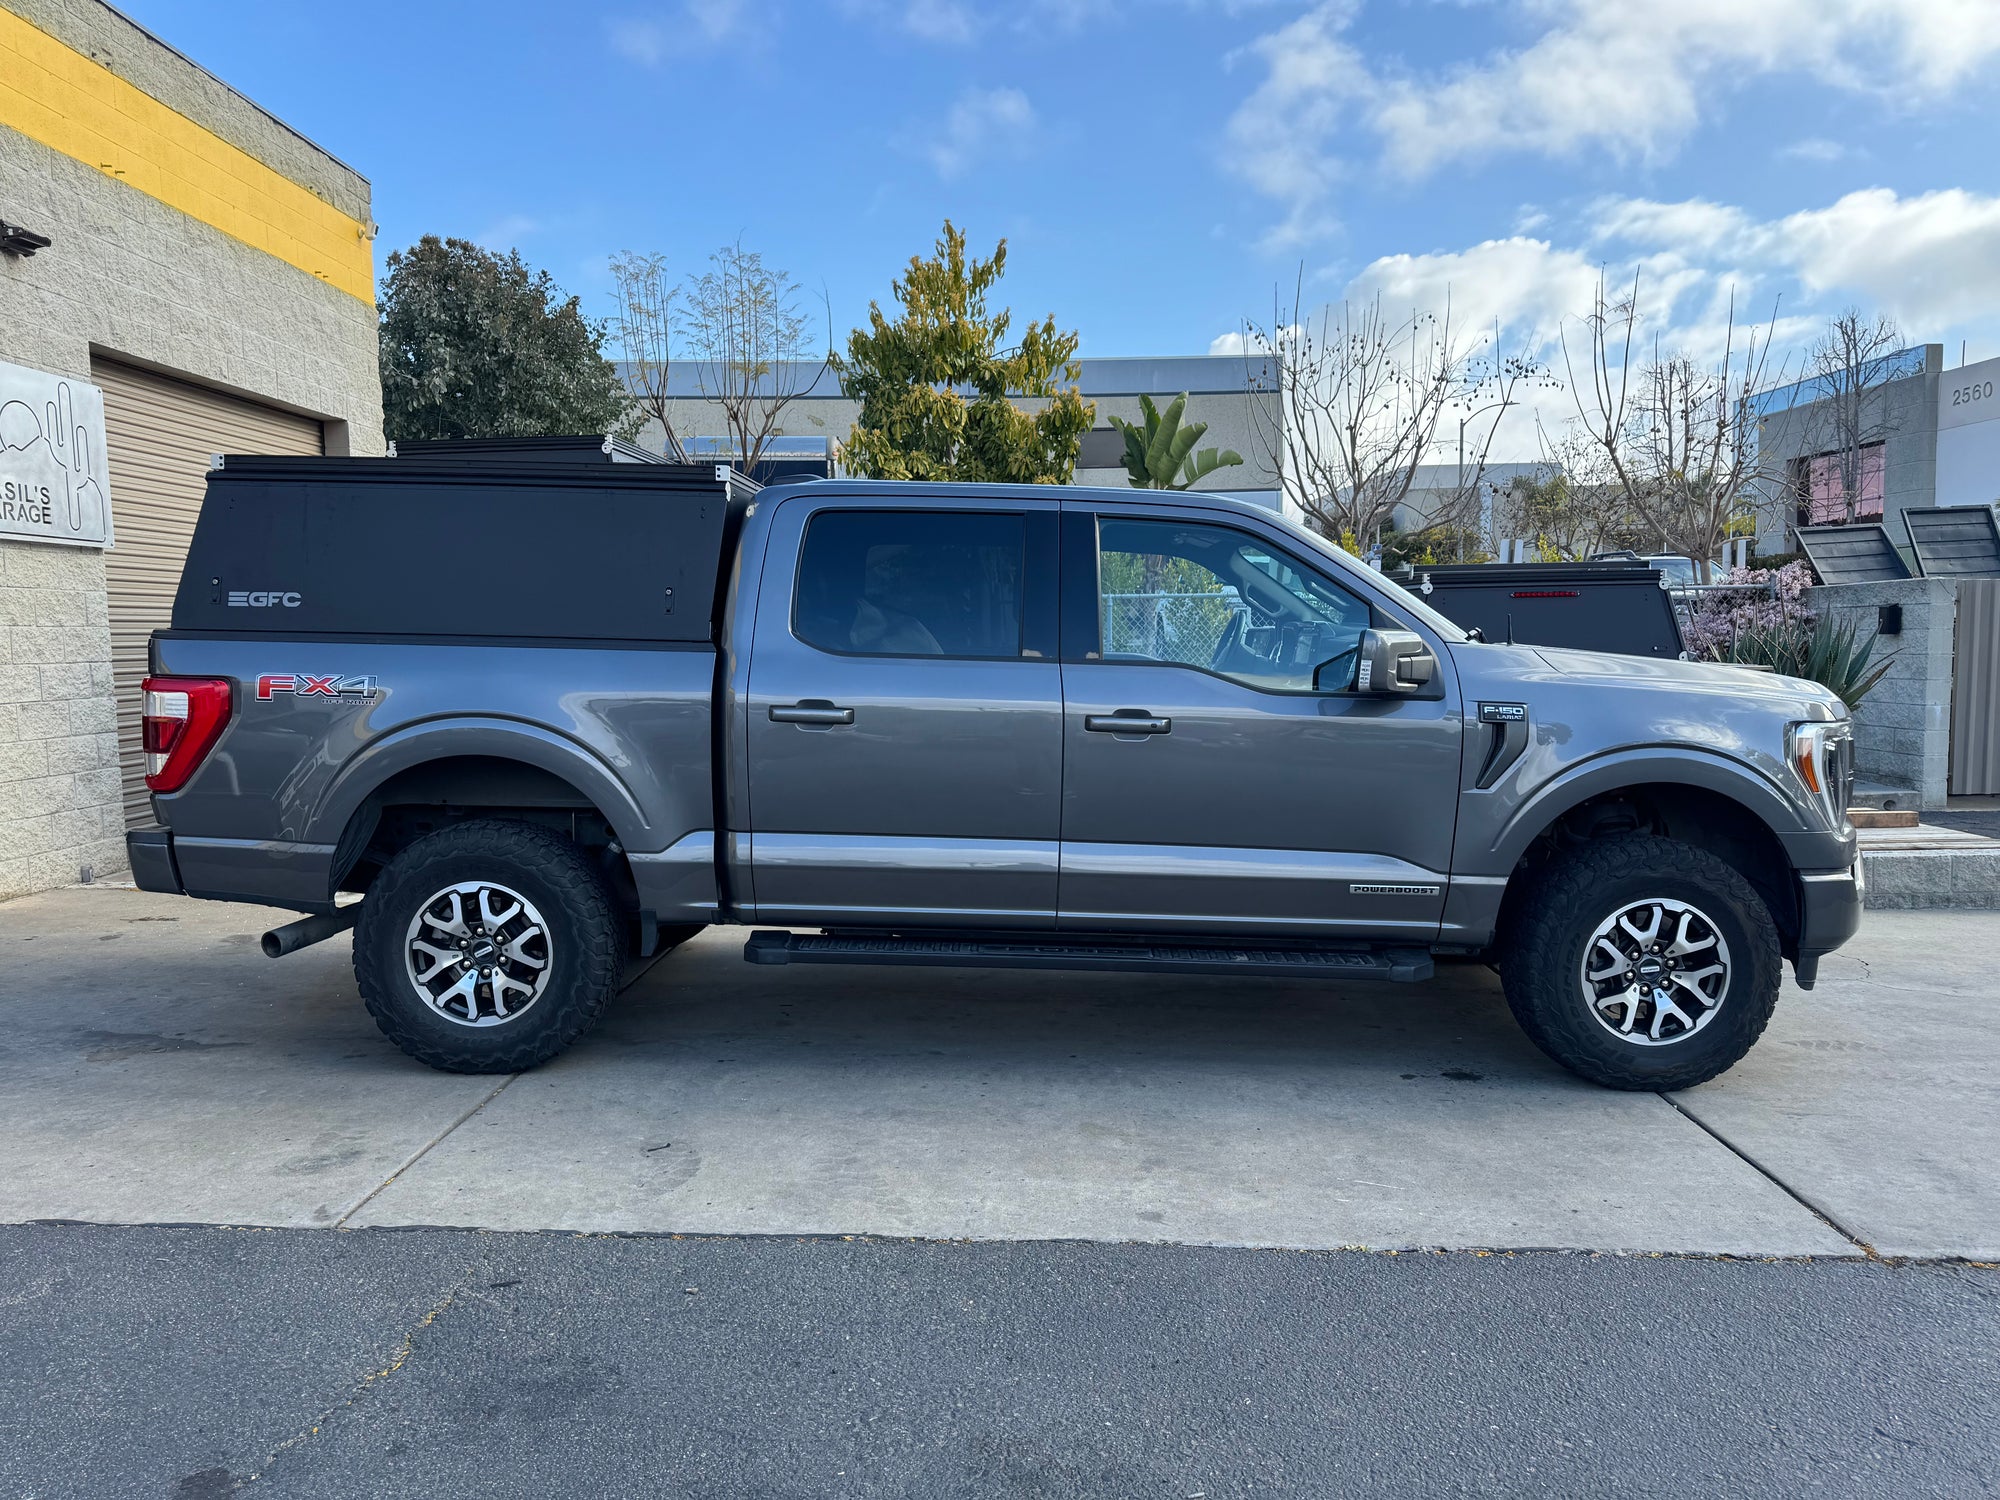 2021 Ford F150 Topper - Build #493